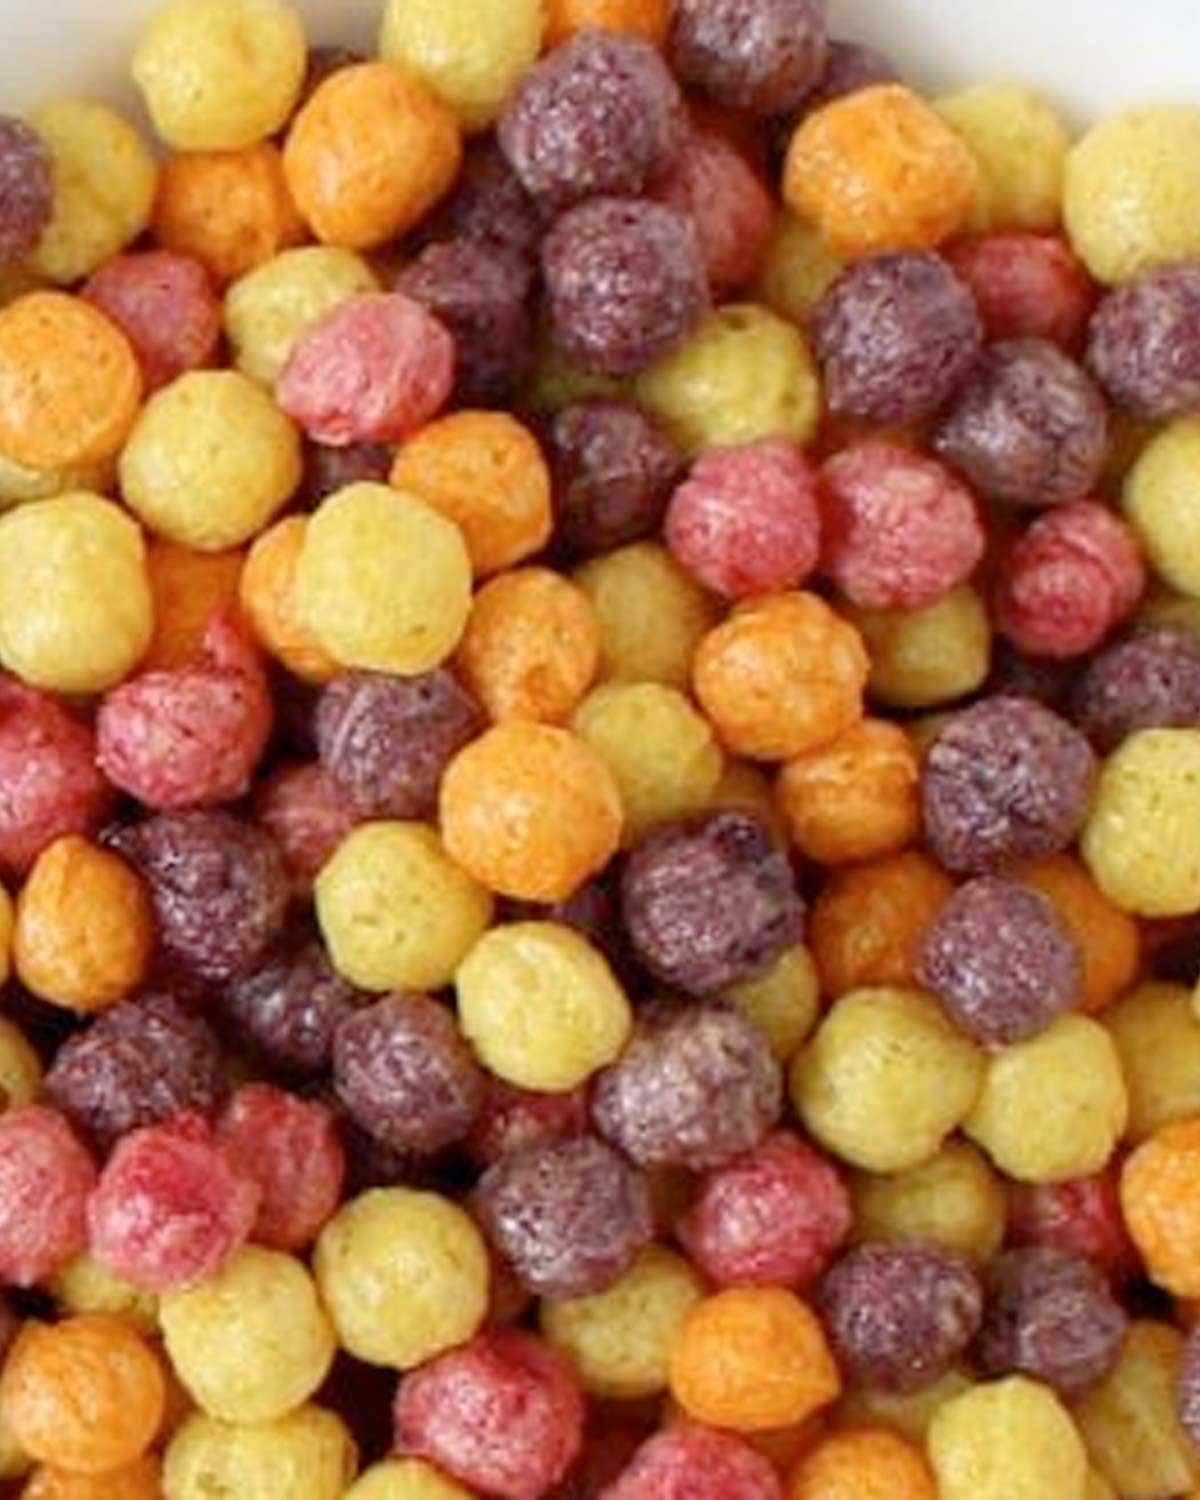 New Trix All Natural Colors Are Here to Ruin Your Childhood Breakfast